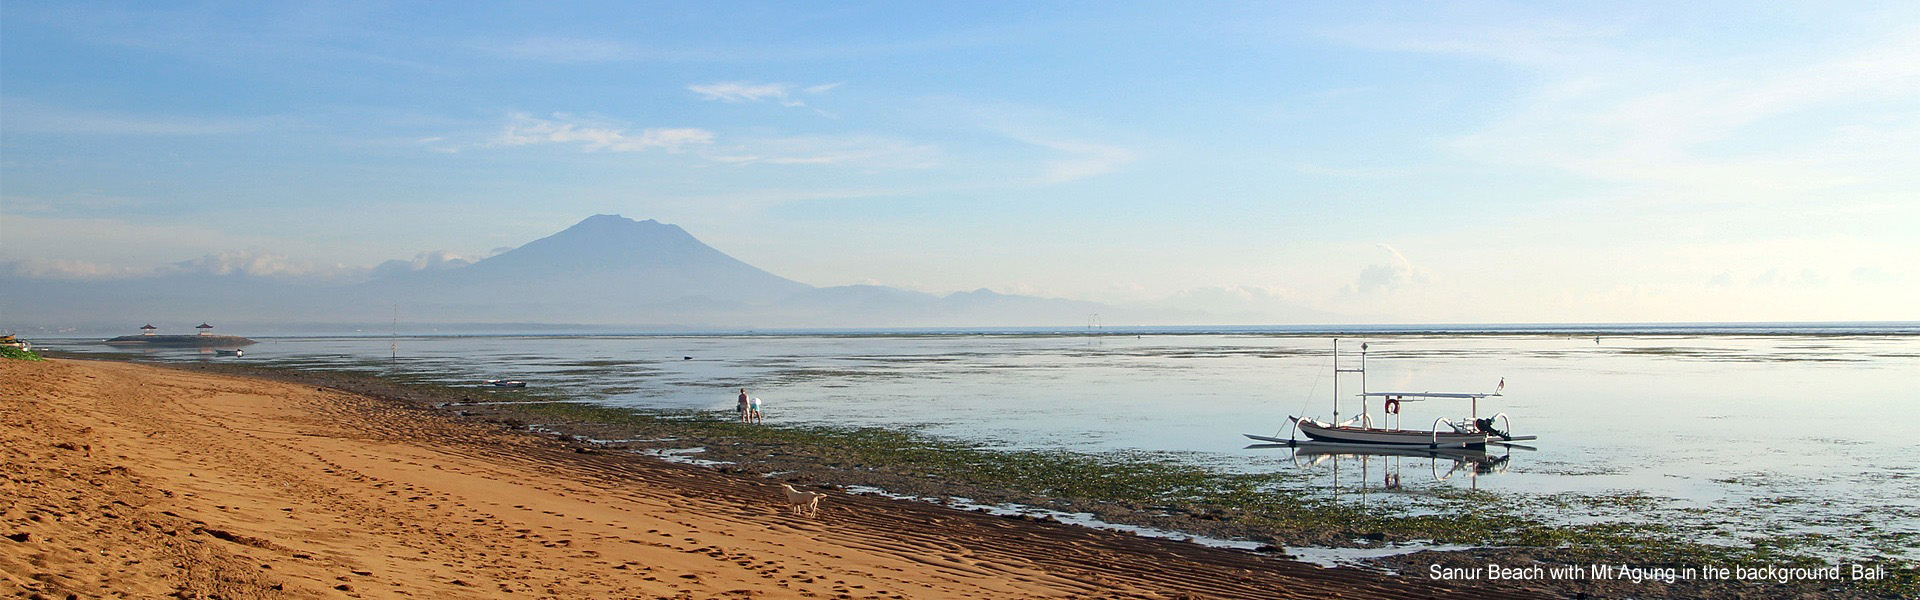 Early morning on Sanur Beach with Mt Agung in the background, Bali